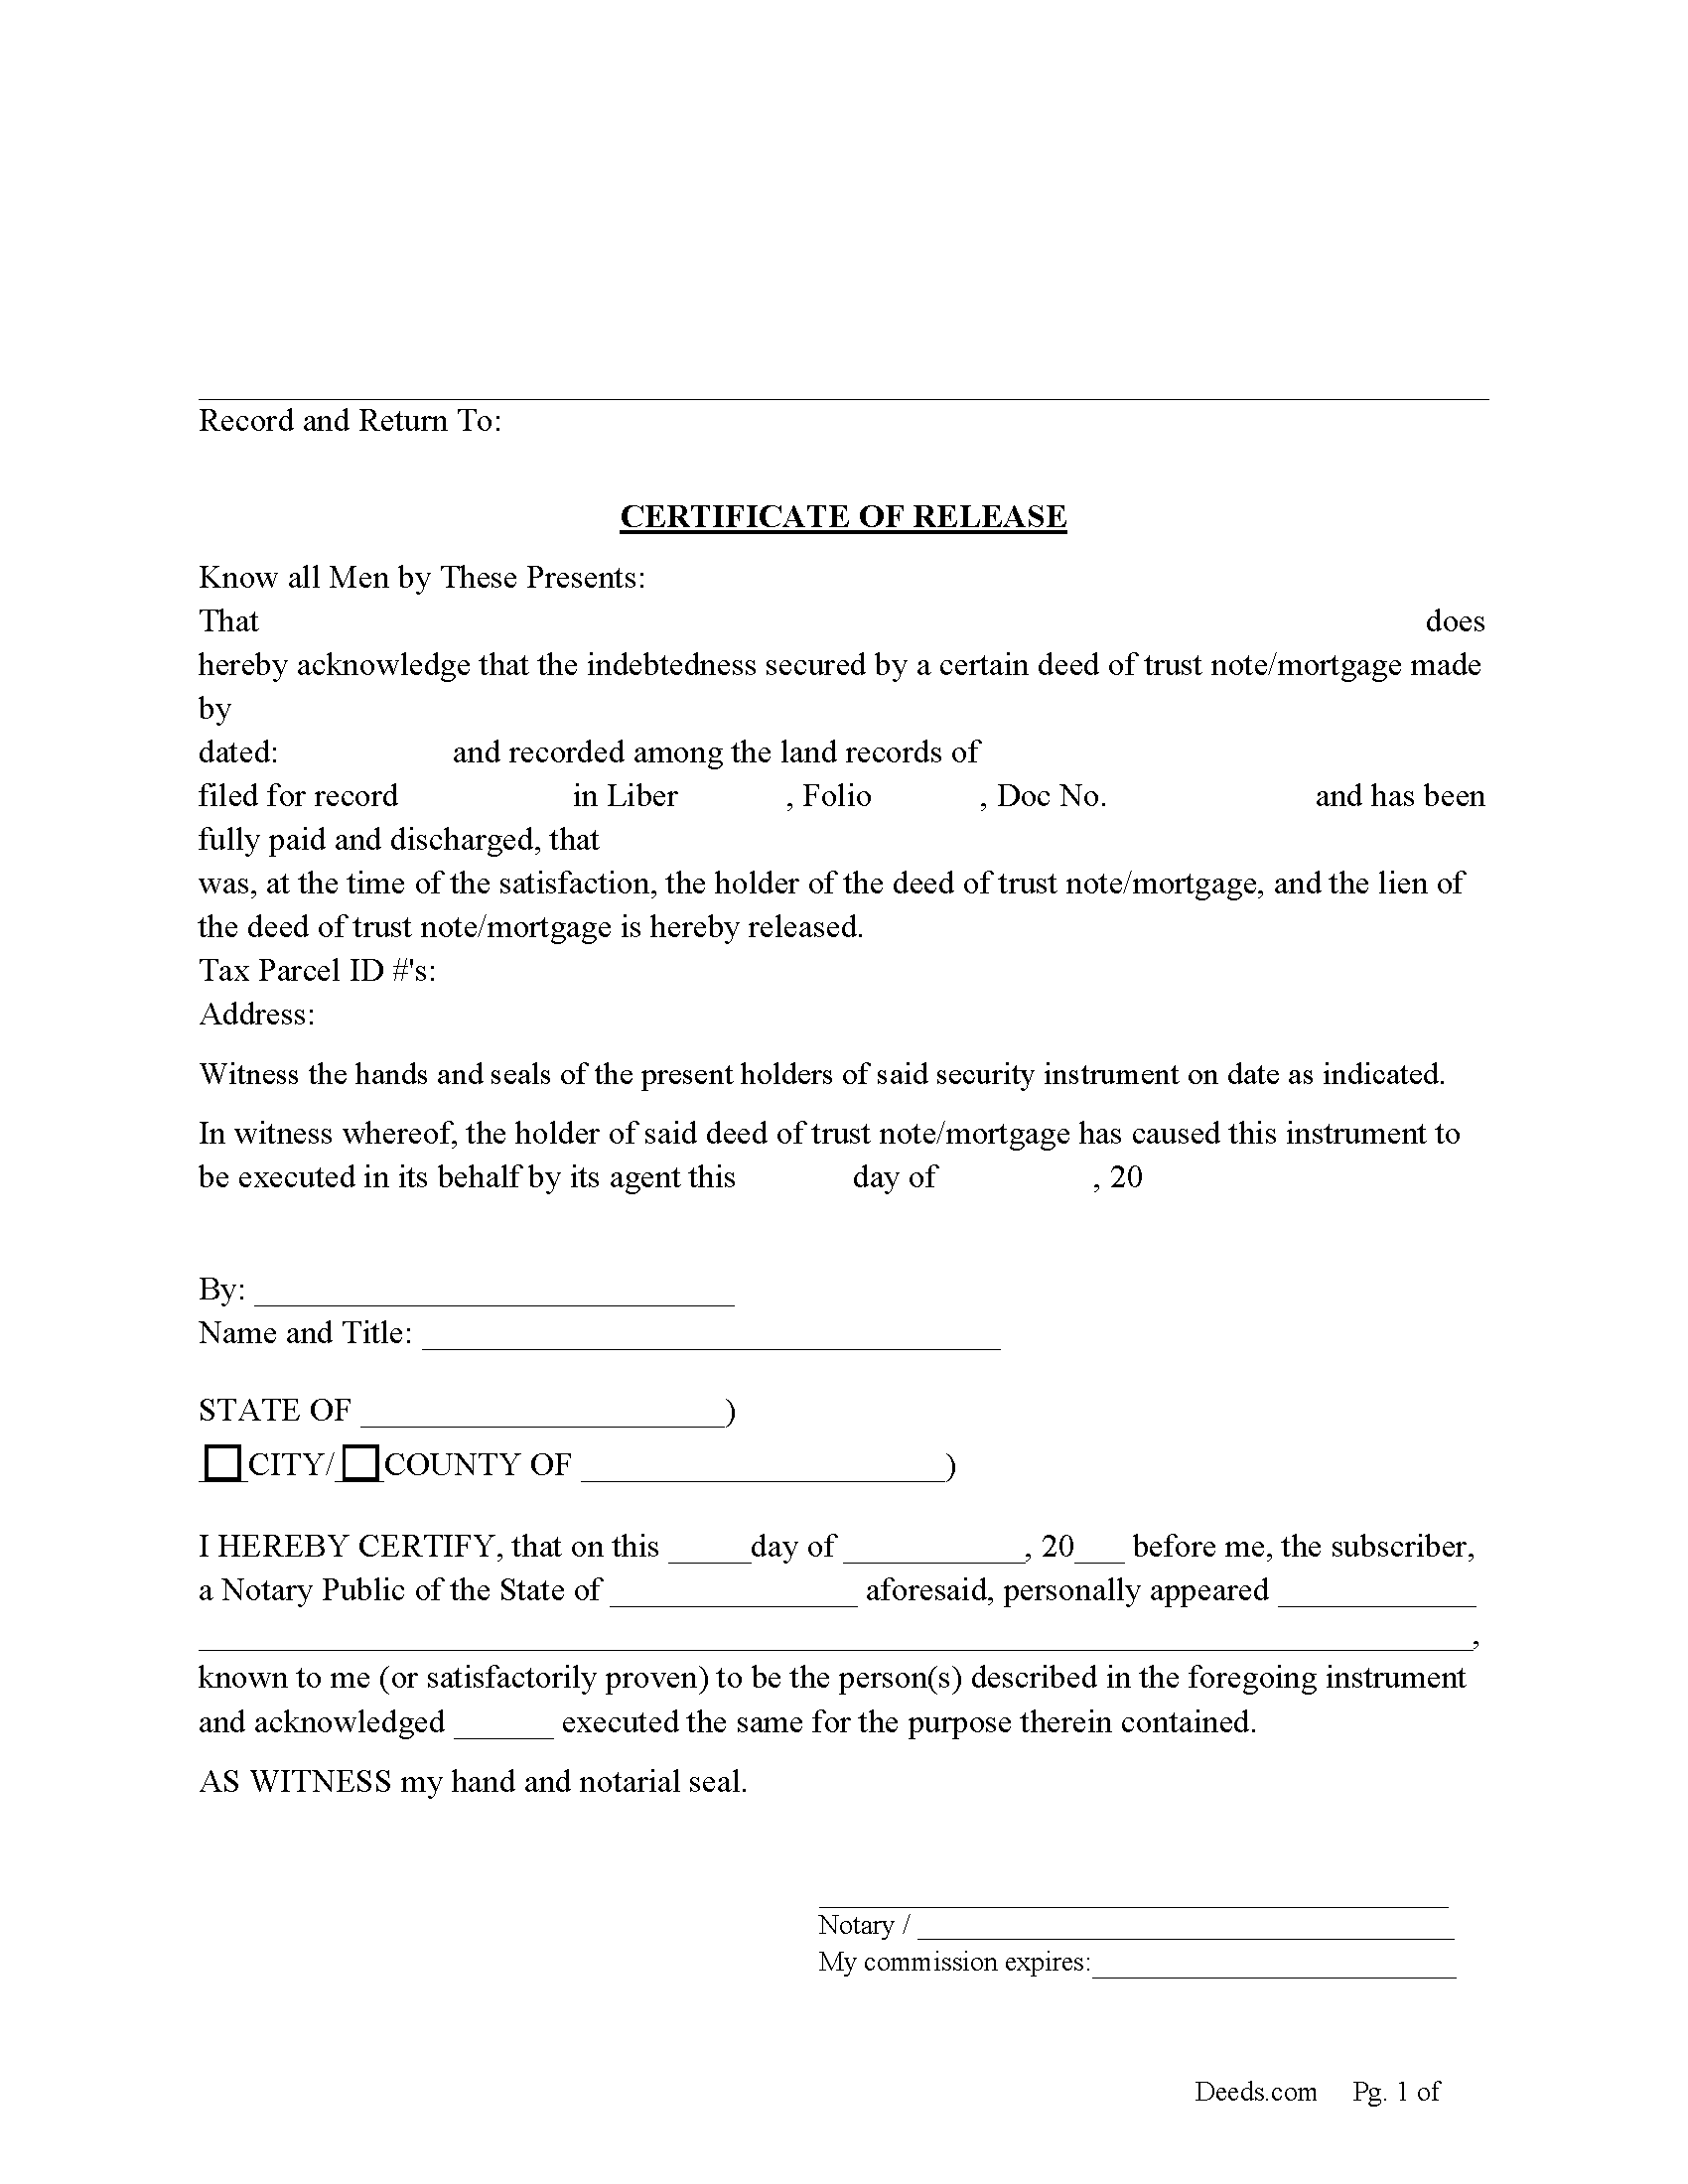 Certificate of Release Form